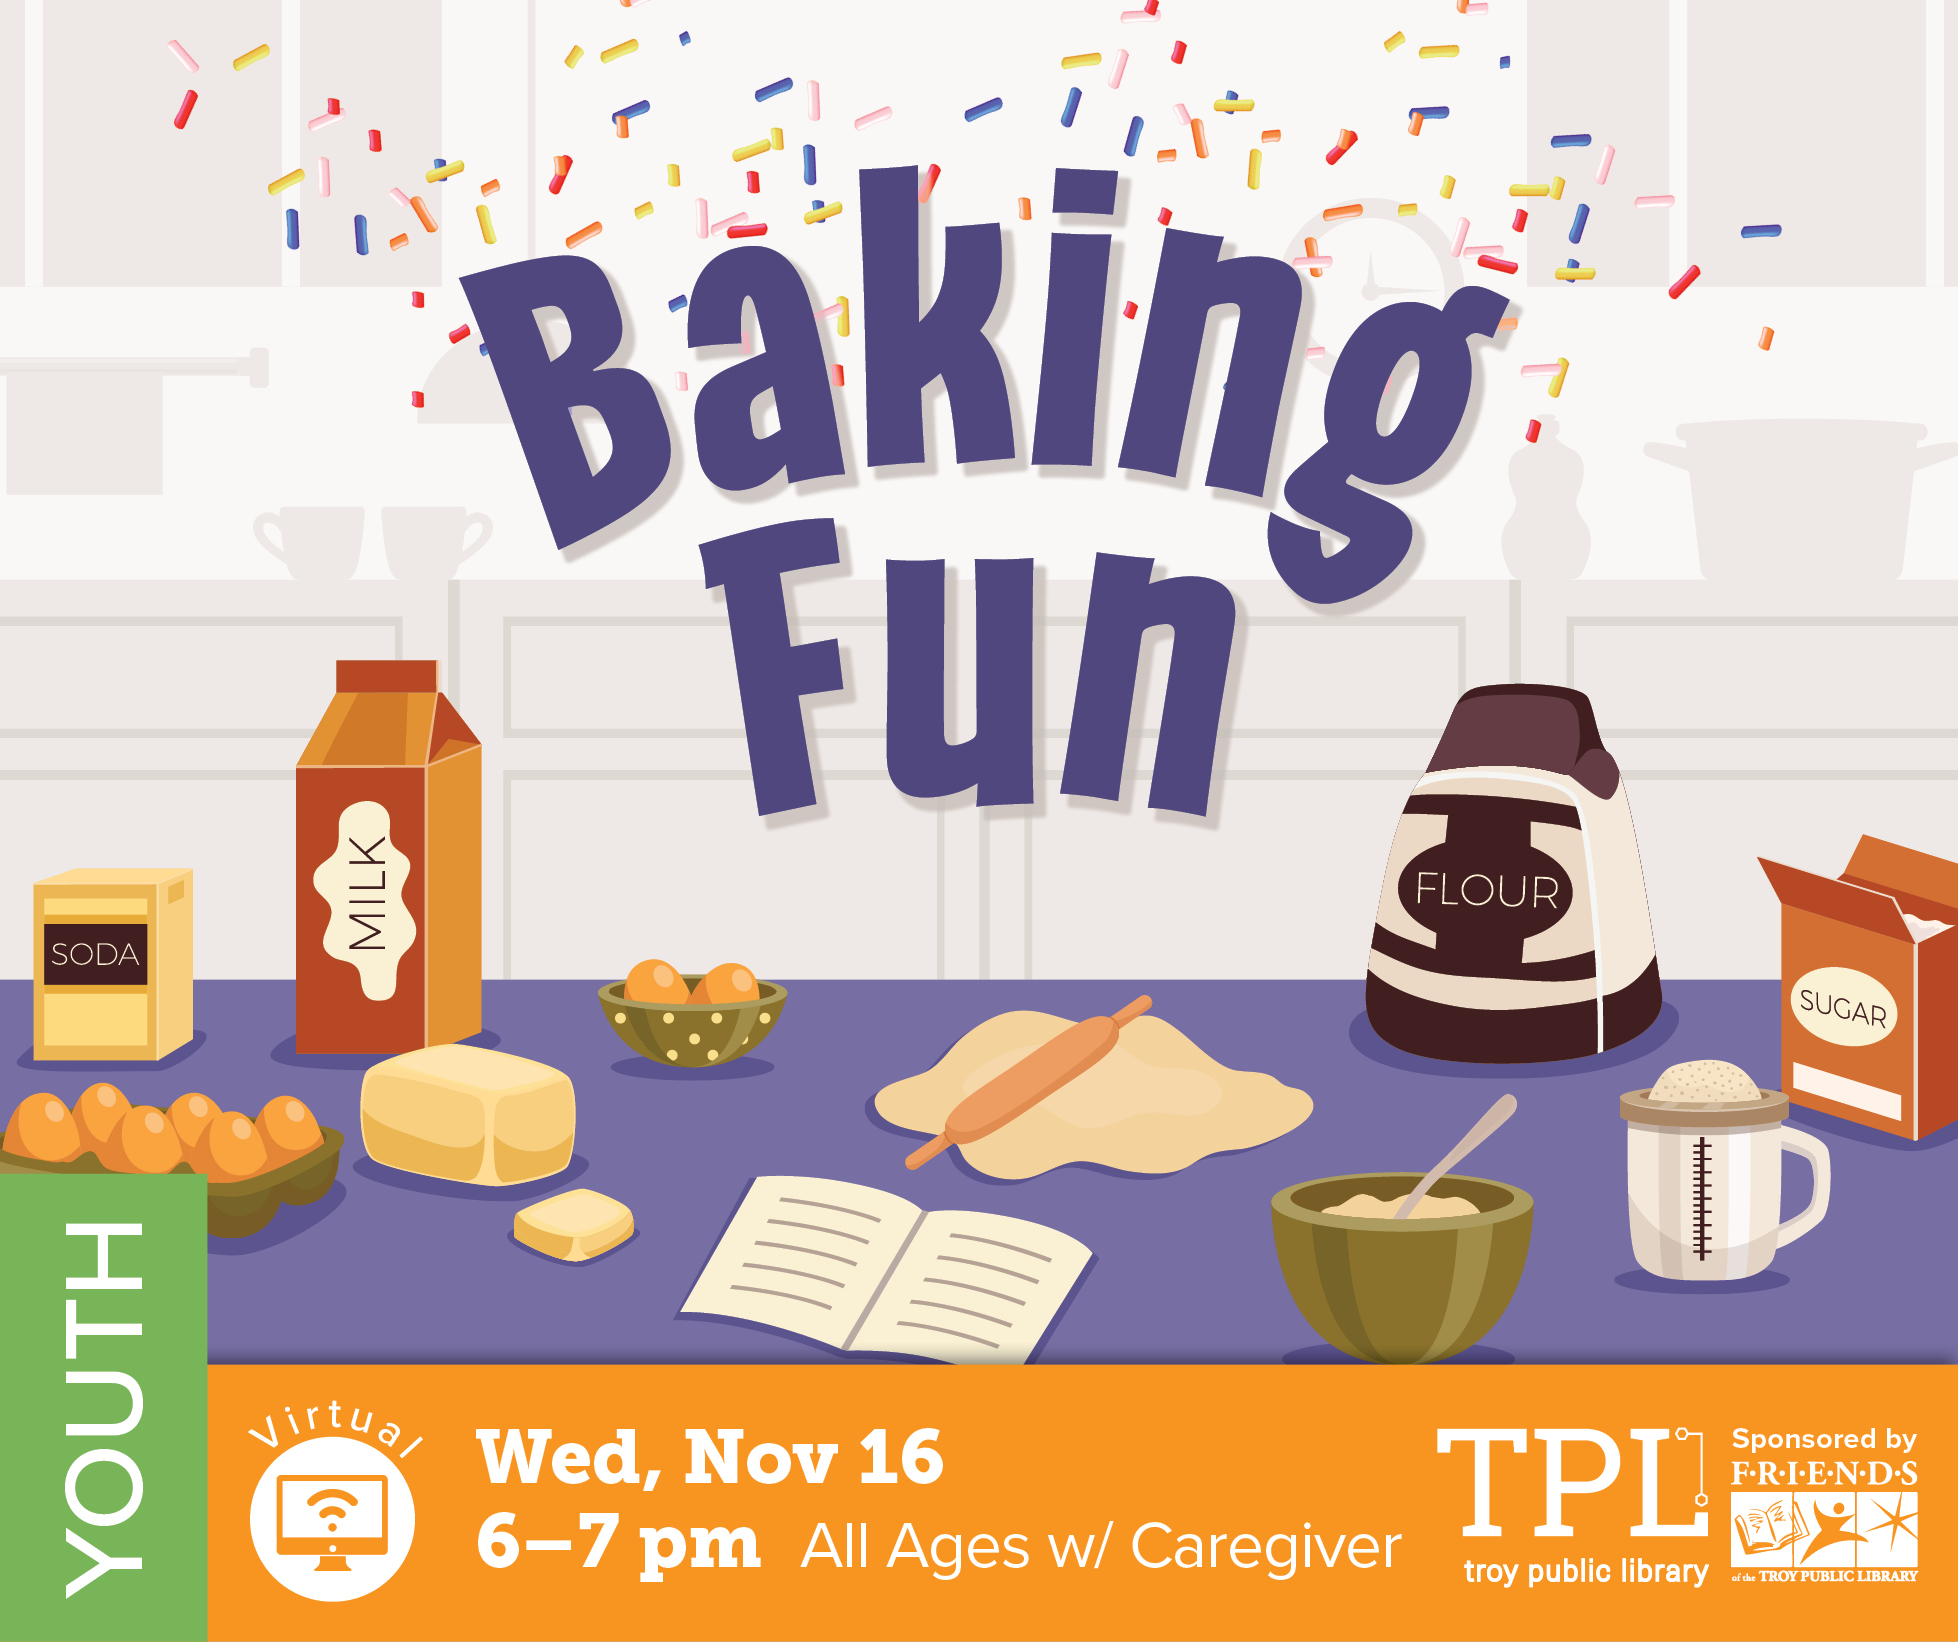 A picture of baking ingredients, along with the text Baking Fun, Wednesday November 16, 6 to 7 pm